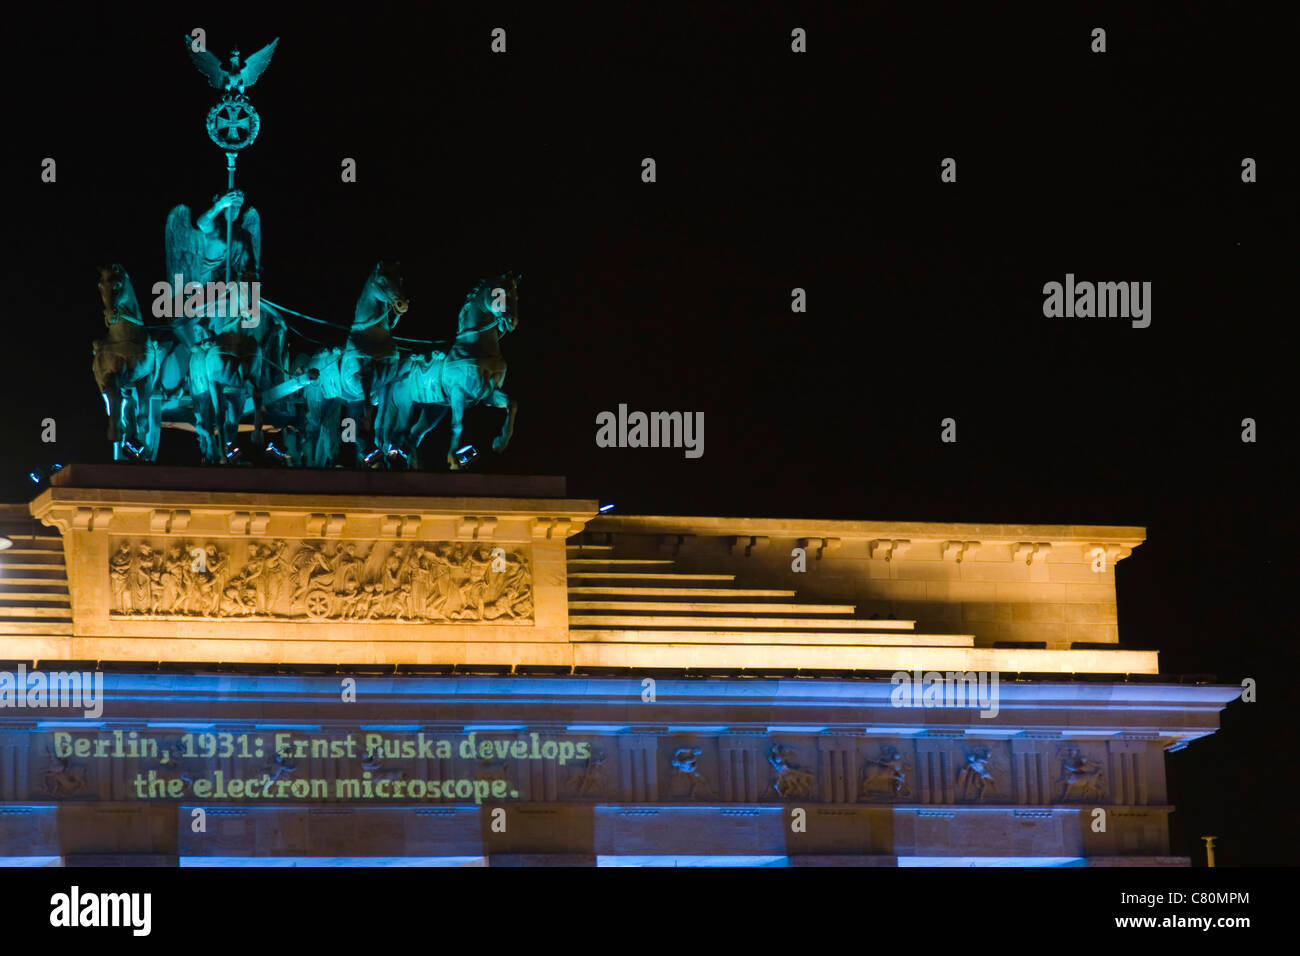 Image taken at night of the Brandenburg Gate during the Festival of Lights in Berlin in October 2010. Stock Photo